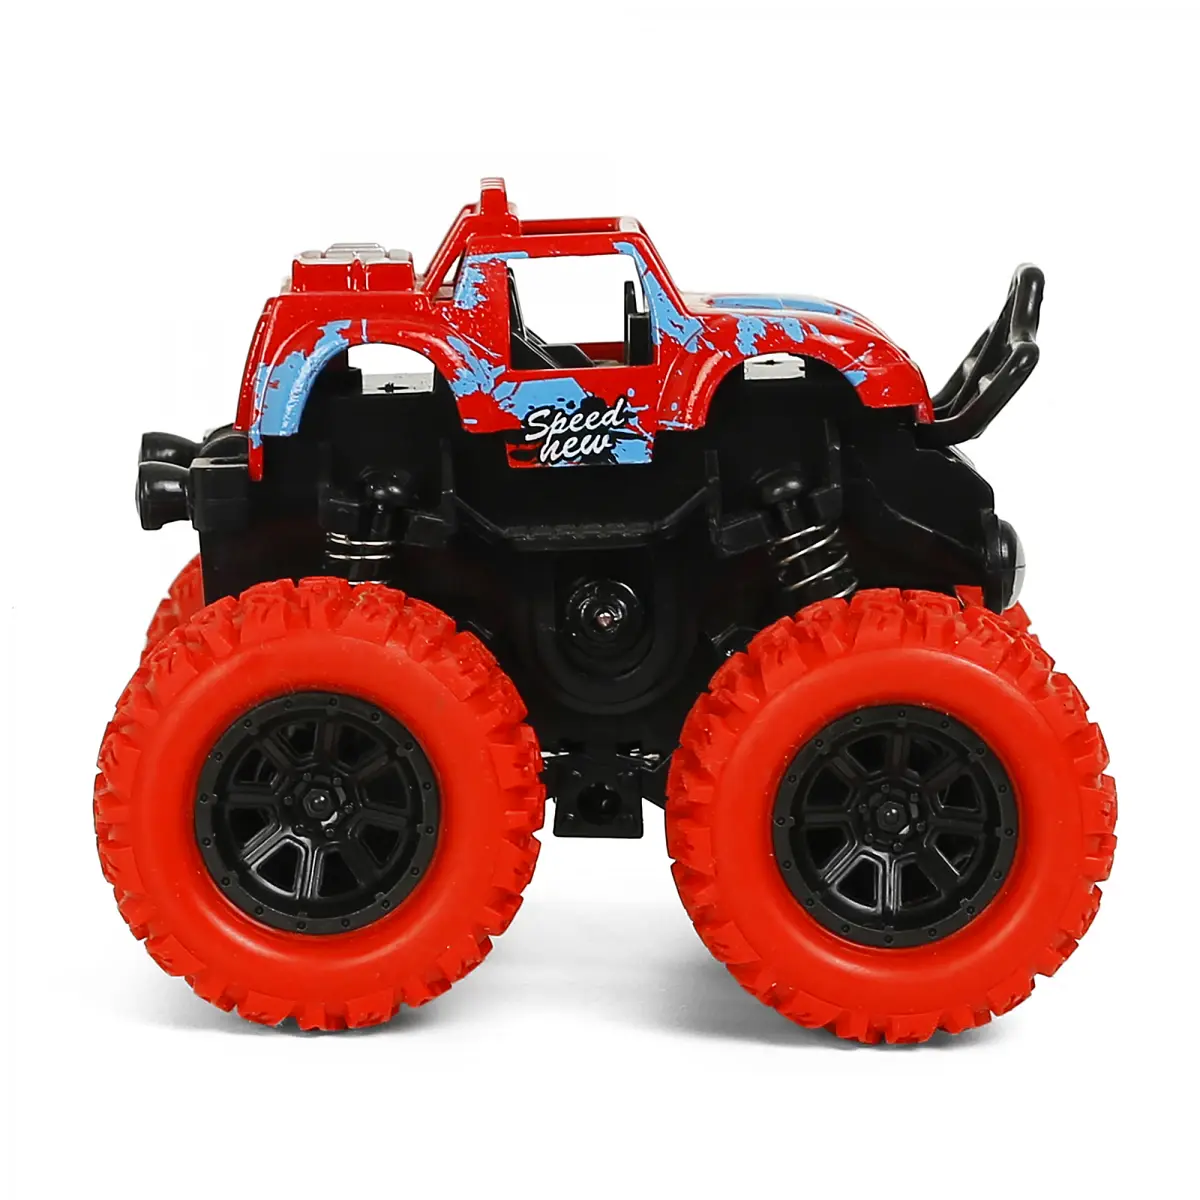 Rallyez Pull Back Monster Friction Cars Toys Truck, 3Y+, Red